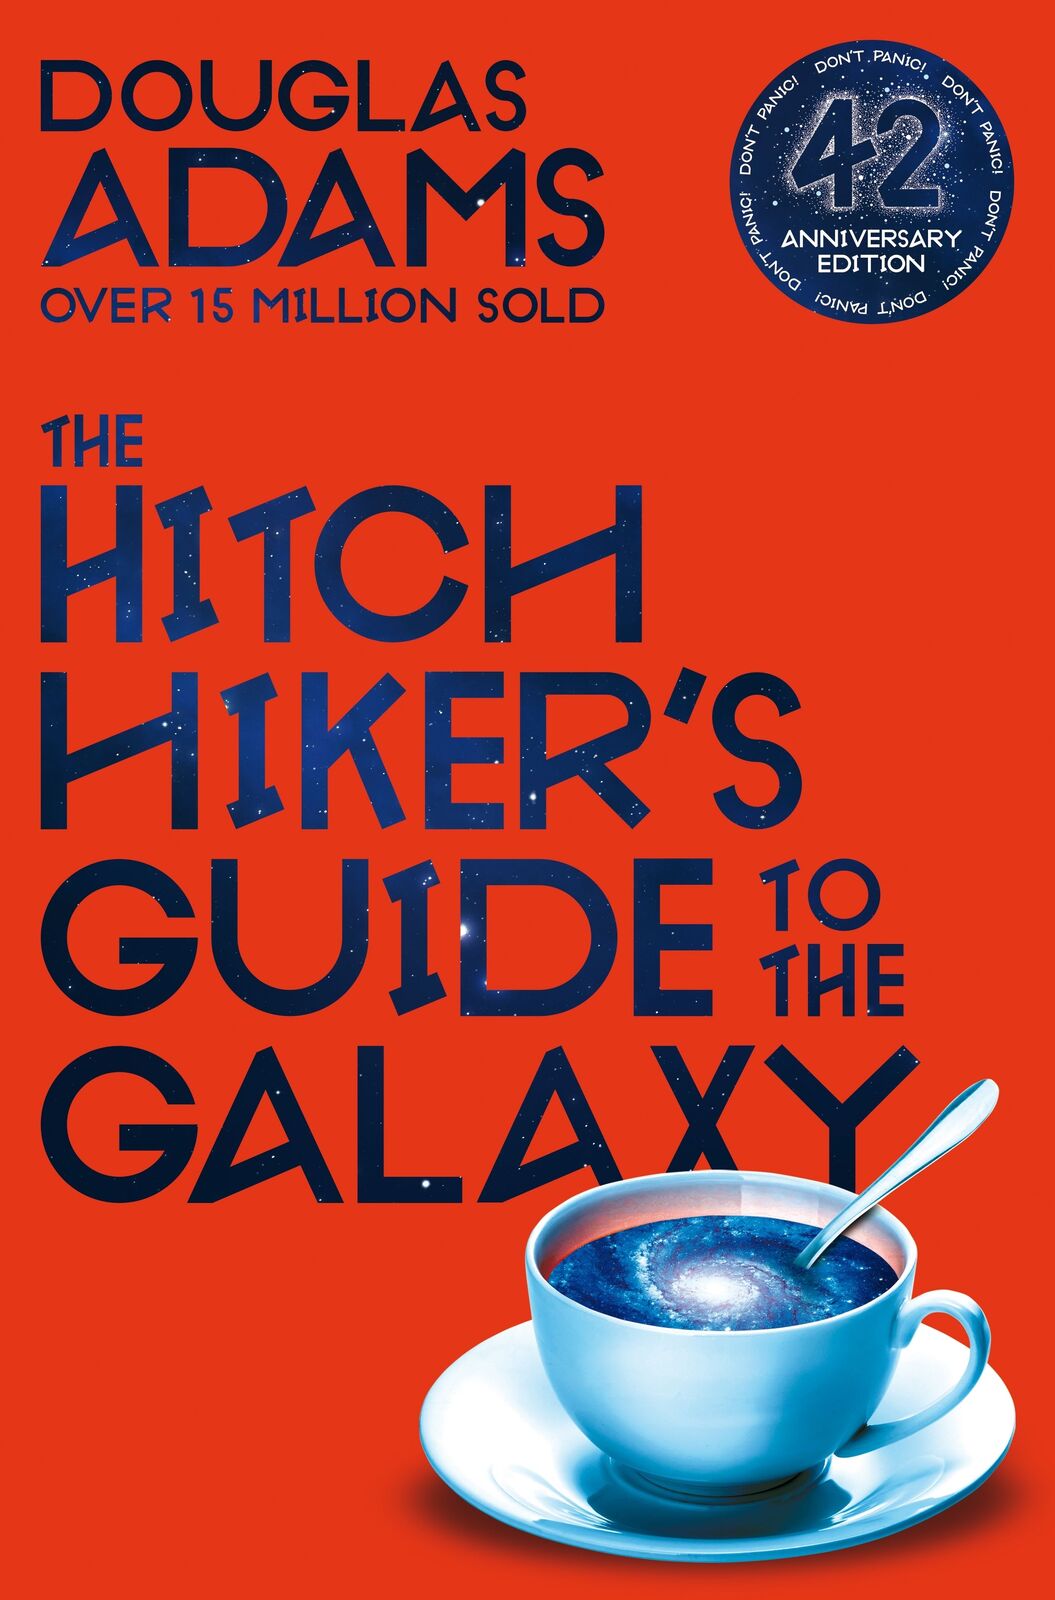 The Hitchhiker's Guide to the Galaxy (British English language, 2005, Pan Books)